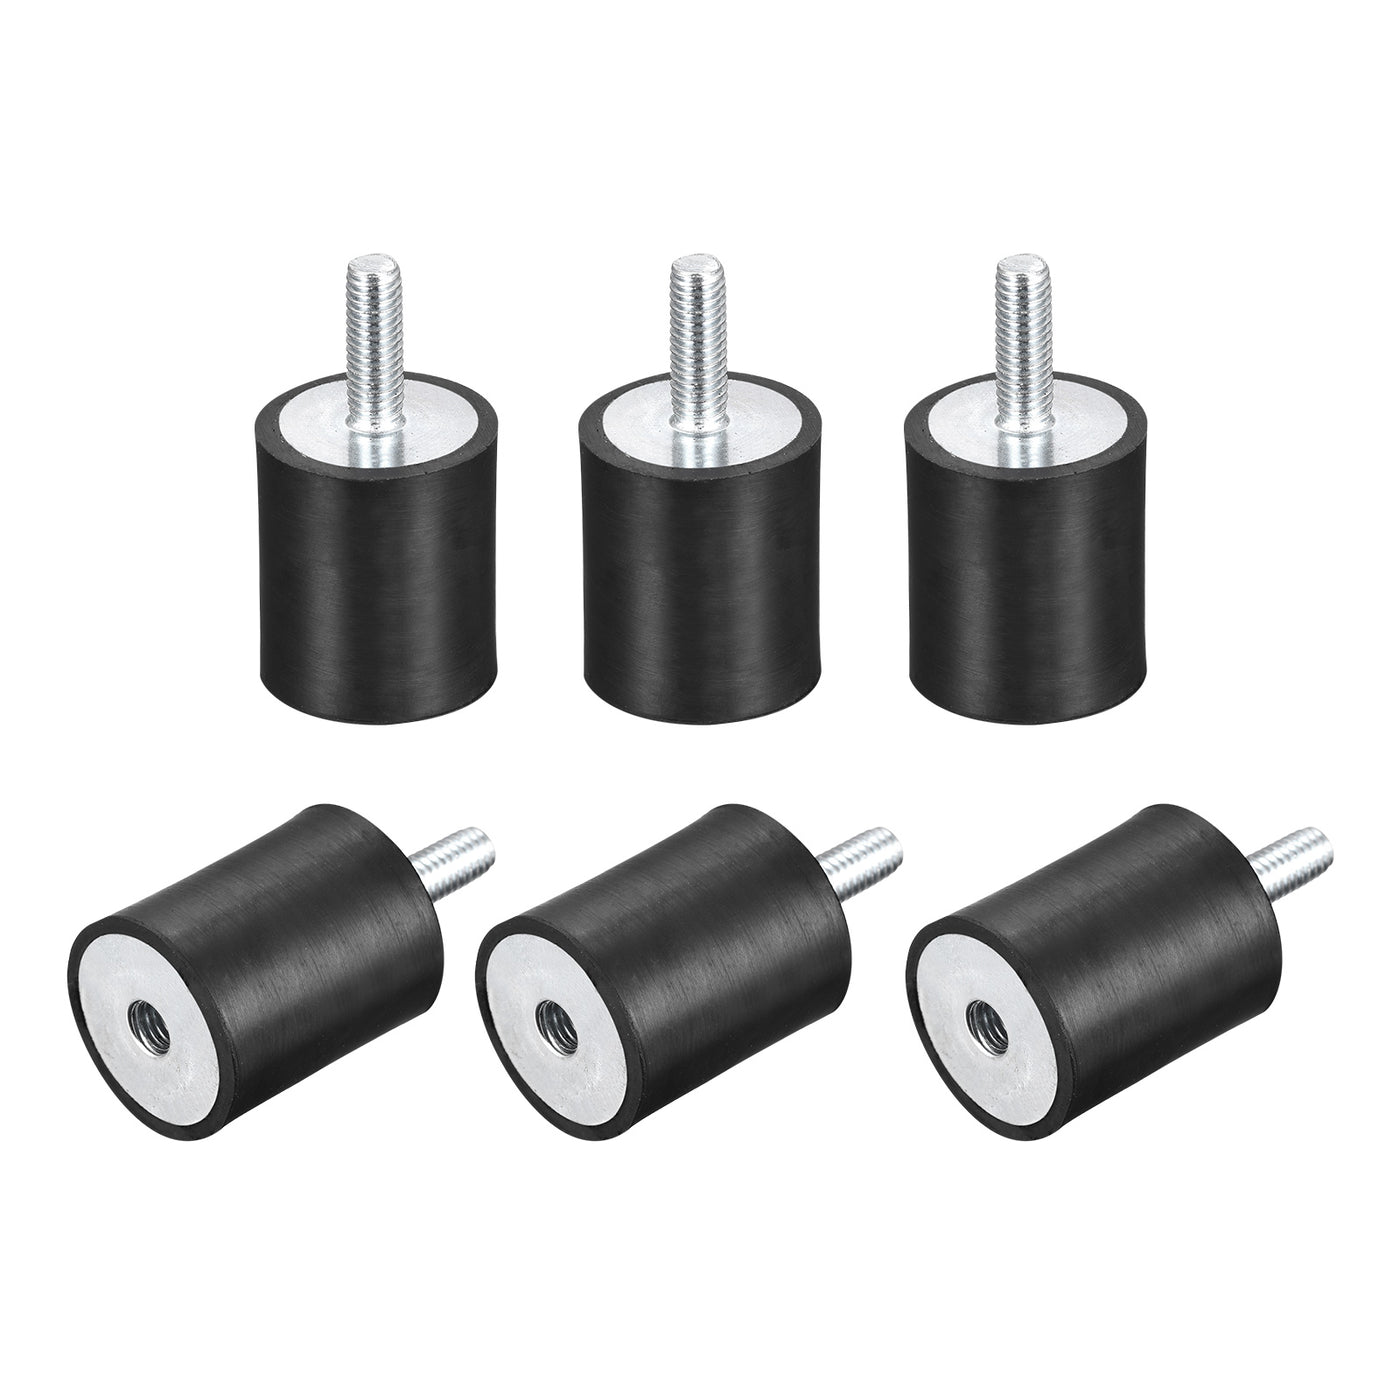 uxcell Uxcell Rubber Mount 6pcs M6 Male/Female Vibration Isolator Shock Absorber, D25mmxH30mm